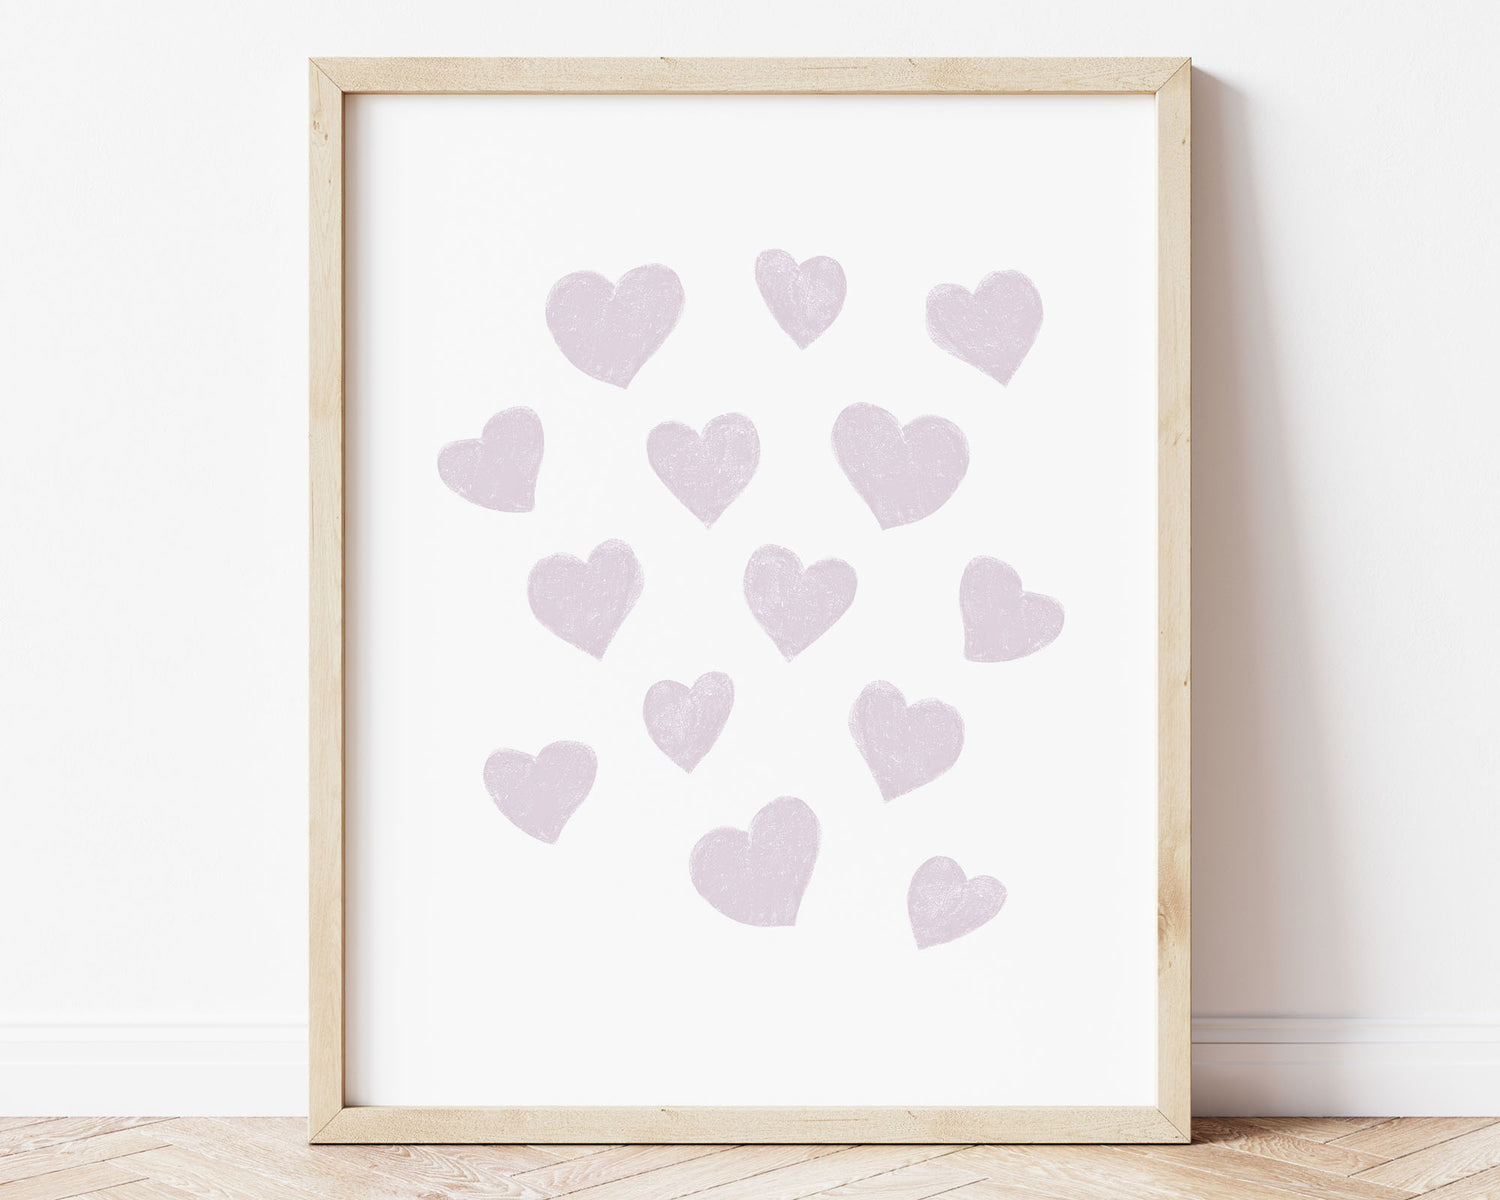 Soft pastel purple, lavender, lilac small scattered hearts in chalky brushstroke illlustration style perfect for Baby Nursery Décor, Little Boys Bedroom Wall Art, Toddler Girls Room Wall Hangings, Kiddos Bathroom Wall Art and Childrens Playroom Décor.